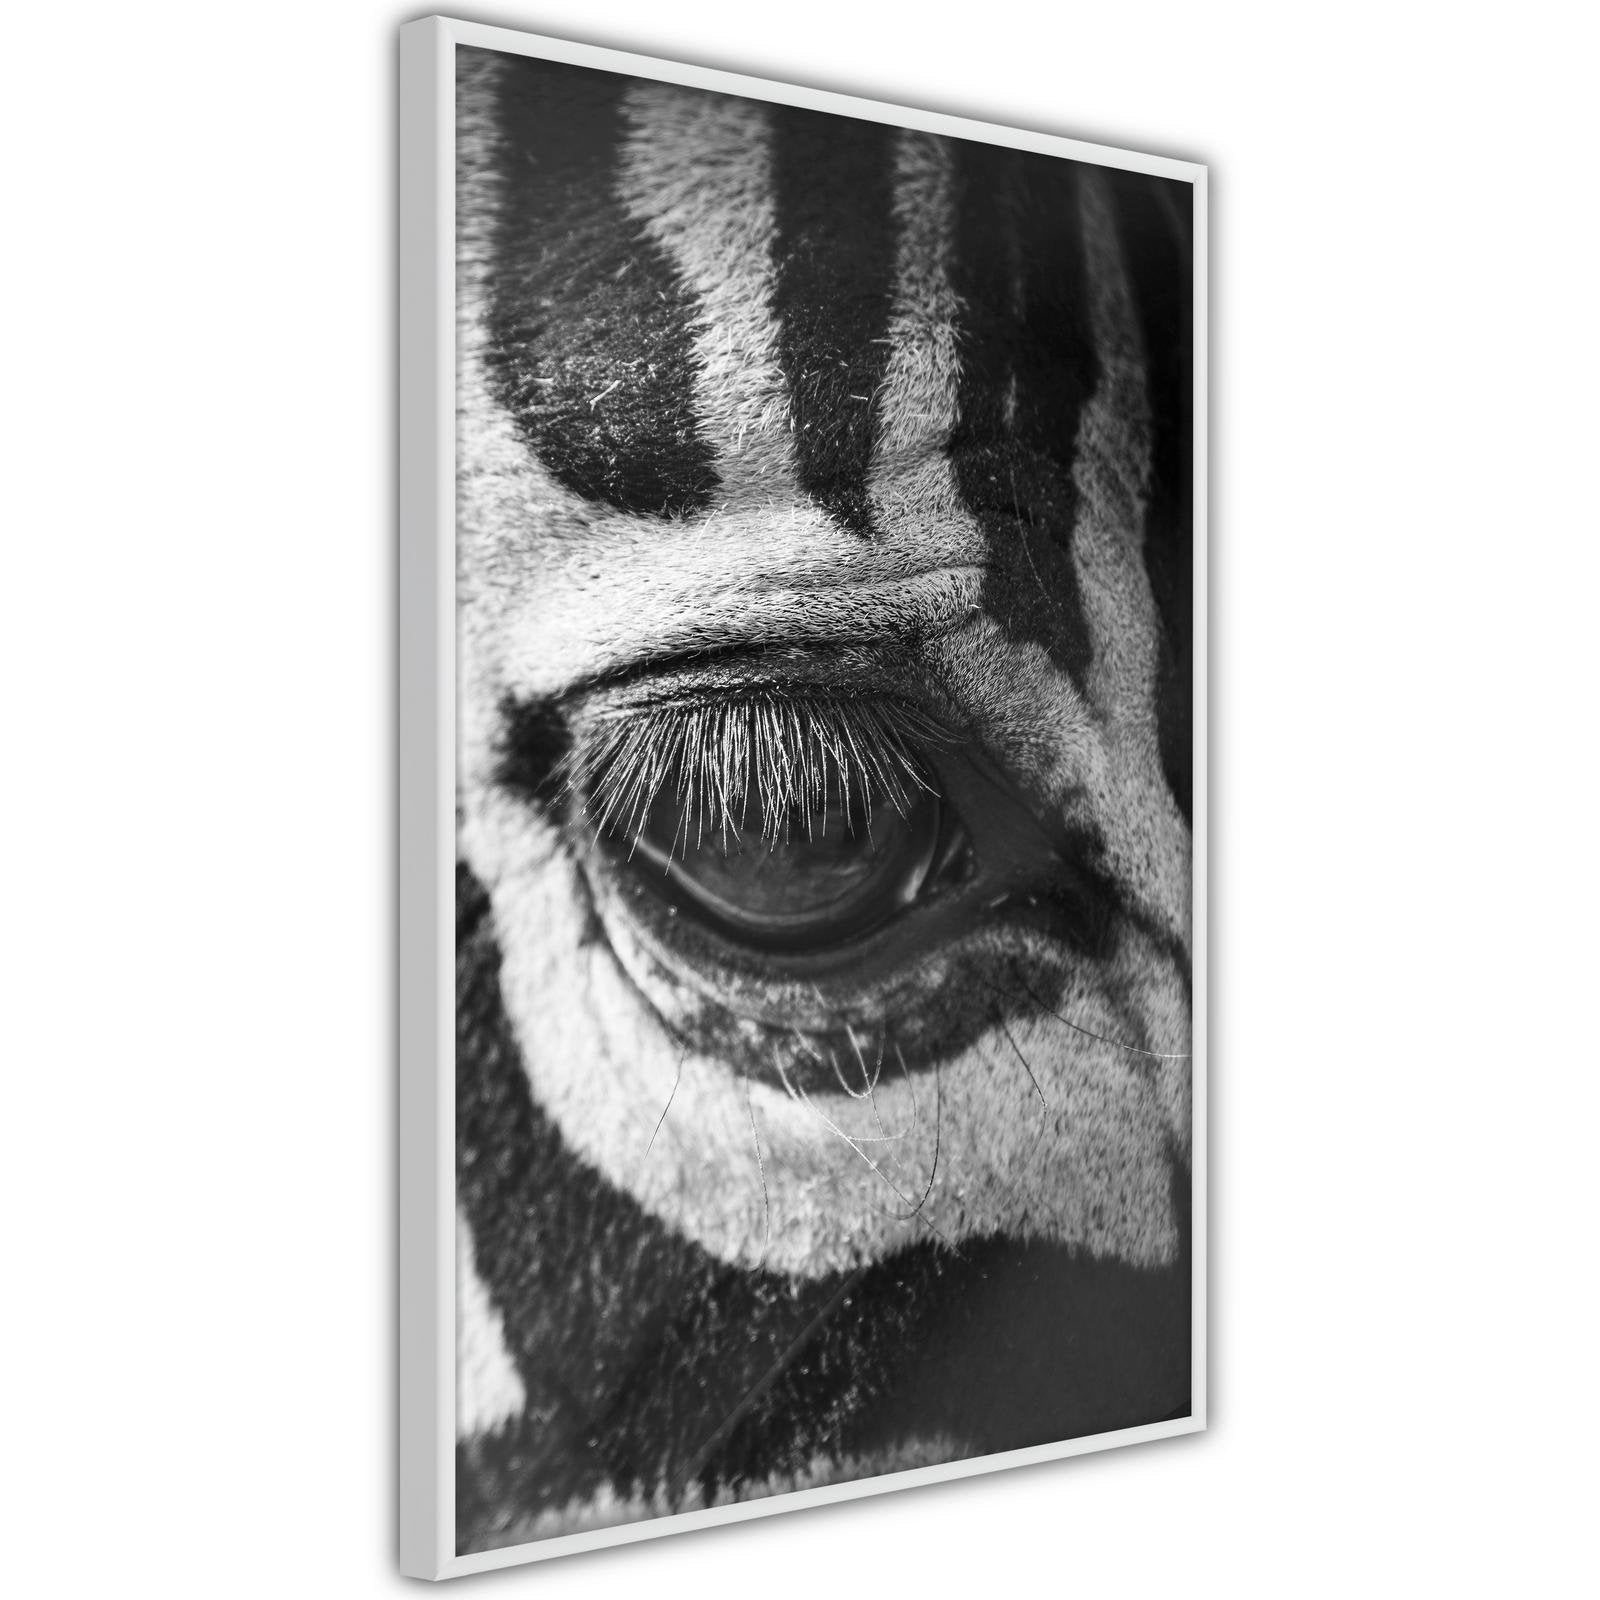 Inramad Poster / Tavla - Zebra Is Watching You-Poster Inramad-Artgeist-peaceofhome.se